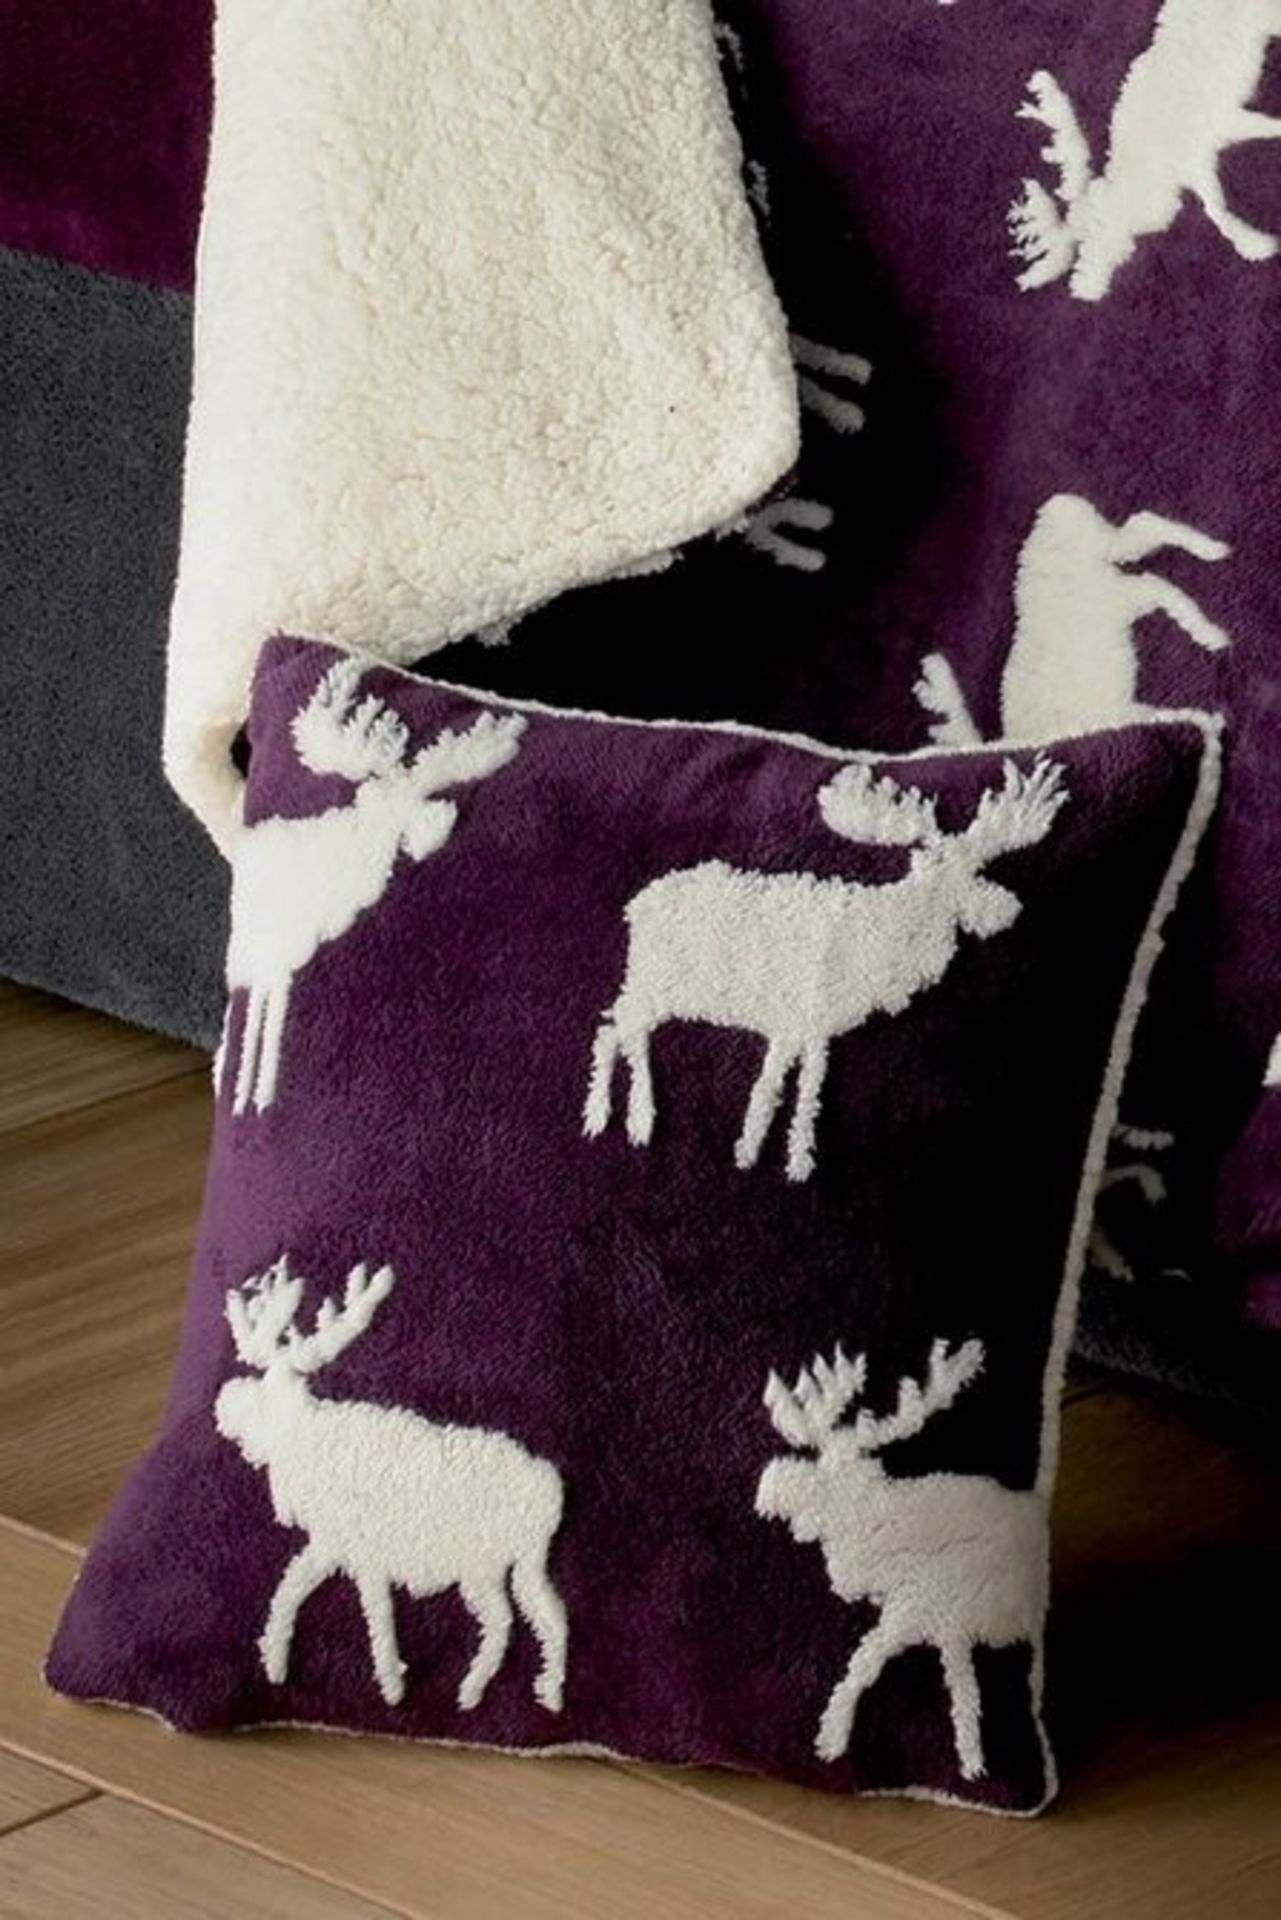 1 BAGGED WARM AND COSY TEDDY 3D STAG CUSHION COVER IN PLUM (PUBLIC VIEWING AVAILABLE) - Image 2 of 2